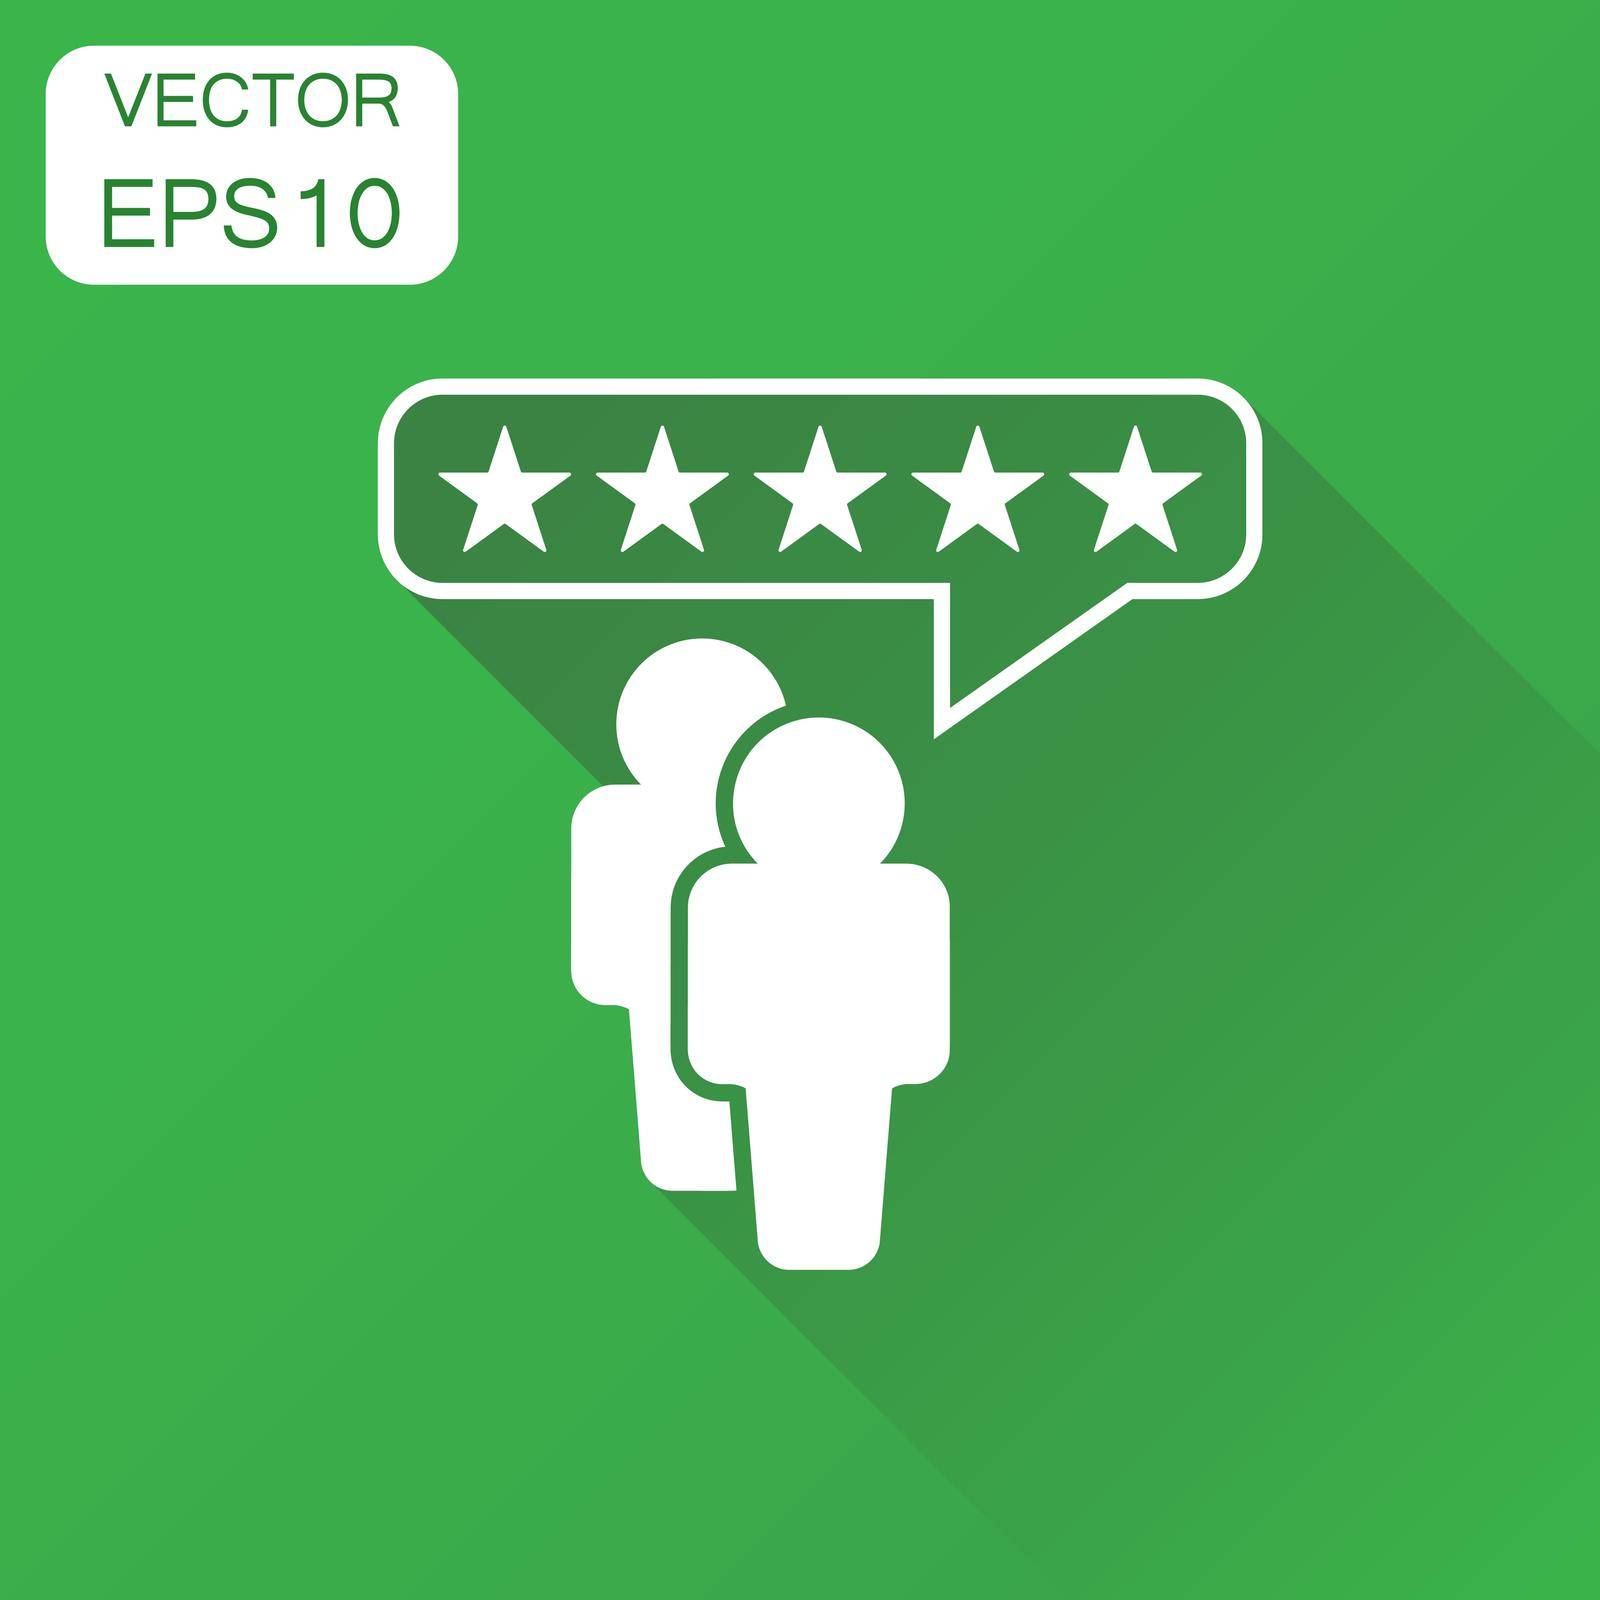 Customer reviews, rating, user feedback icon. Business concept rating pictogram. Vector illustration on green background with long shadow. by LysenkoA